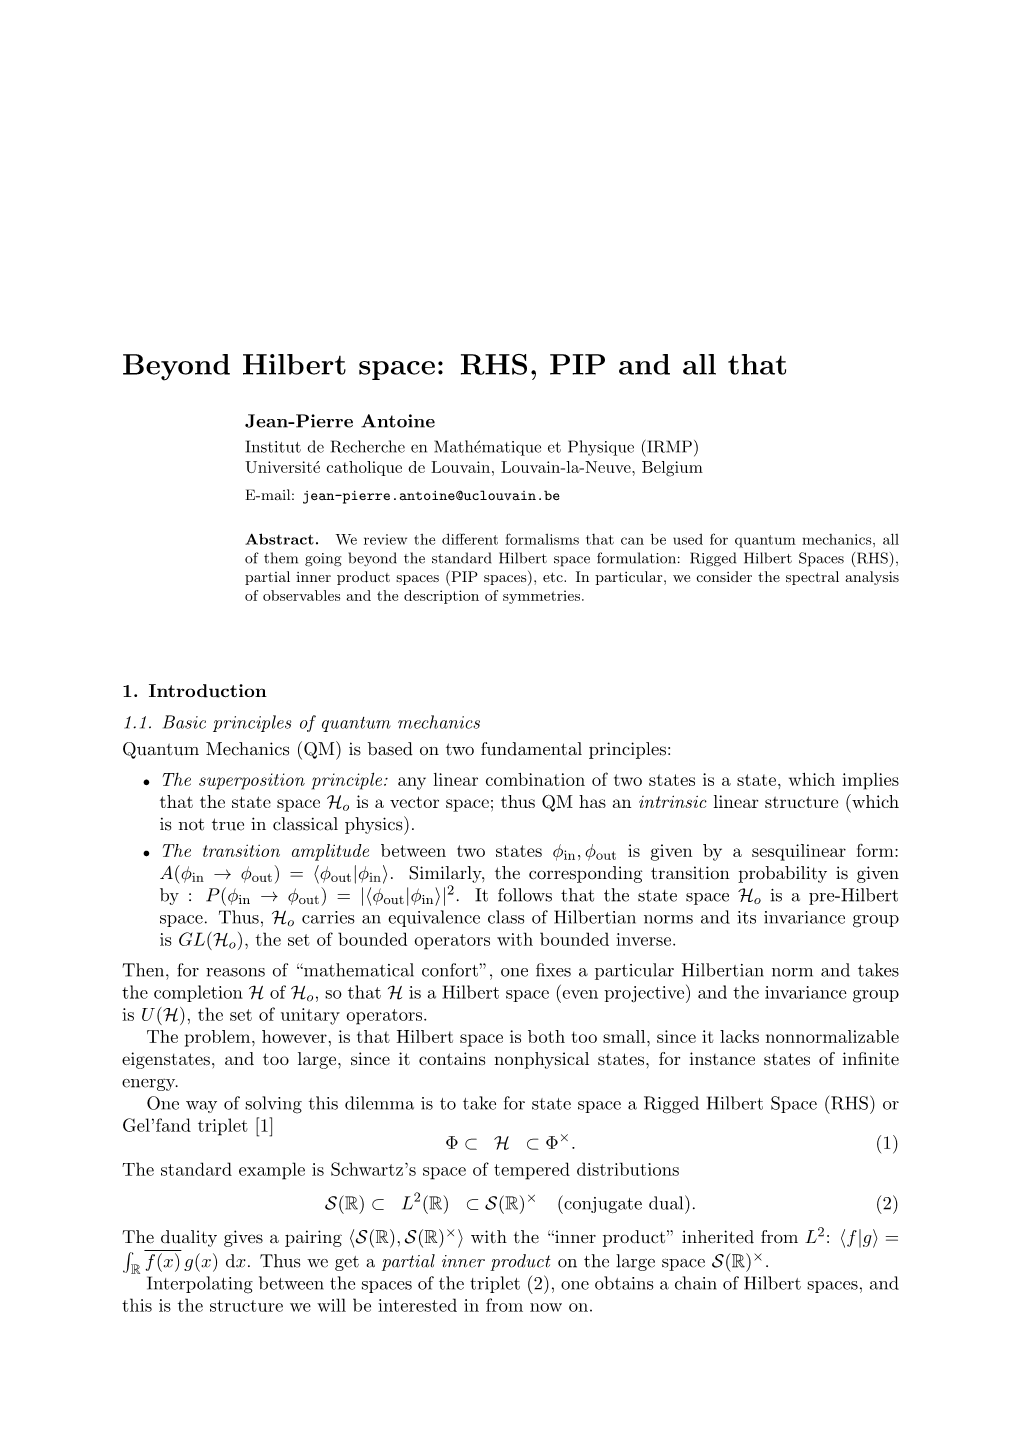 Beyond Hilbert Space: RHS, PIP and All That